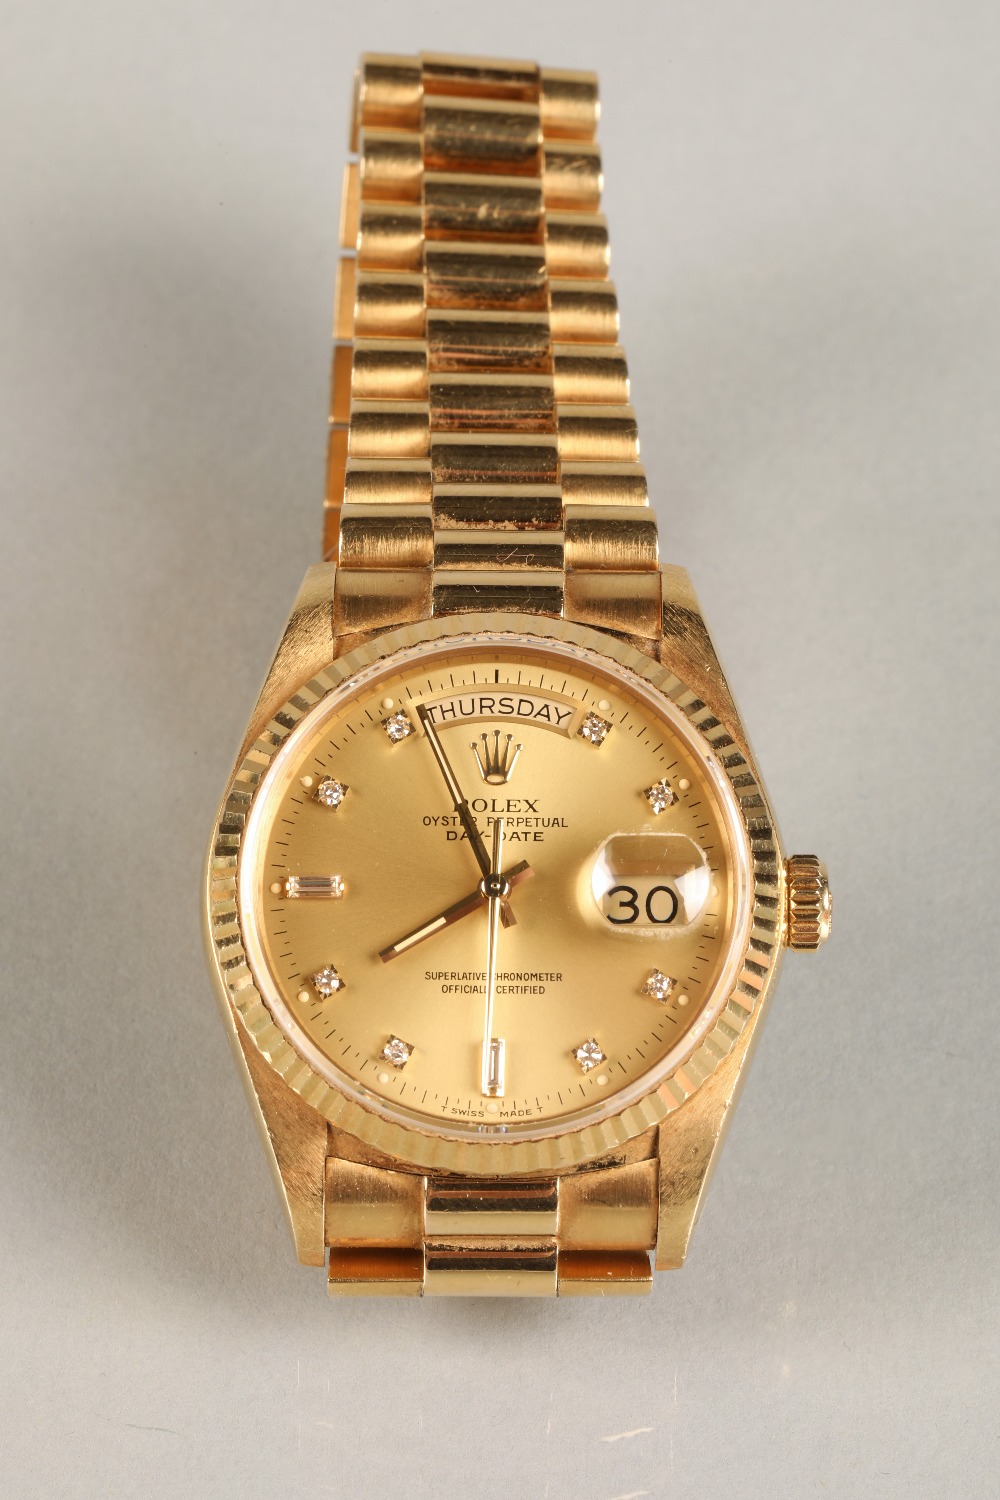 Rolex Oyster Perpetual Day-Date 18k gold Gentleman's wrist watch. Gold coloured dial with Diamond - Image 9 of 10